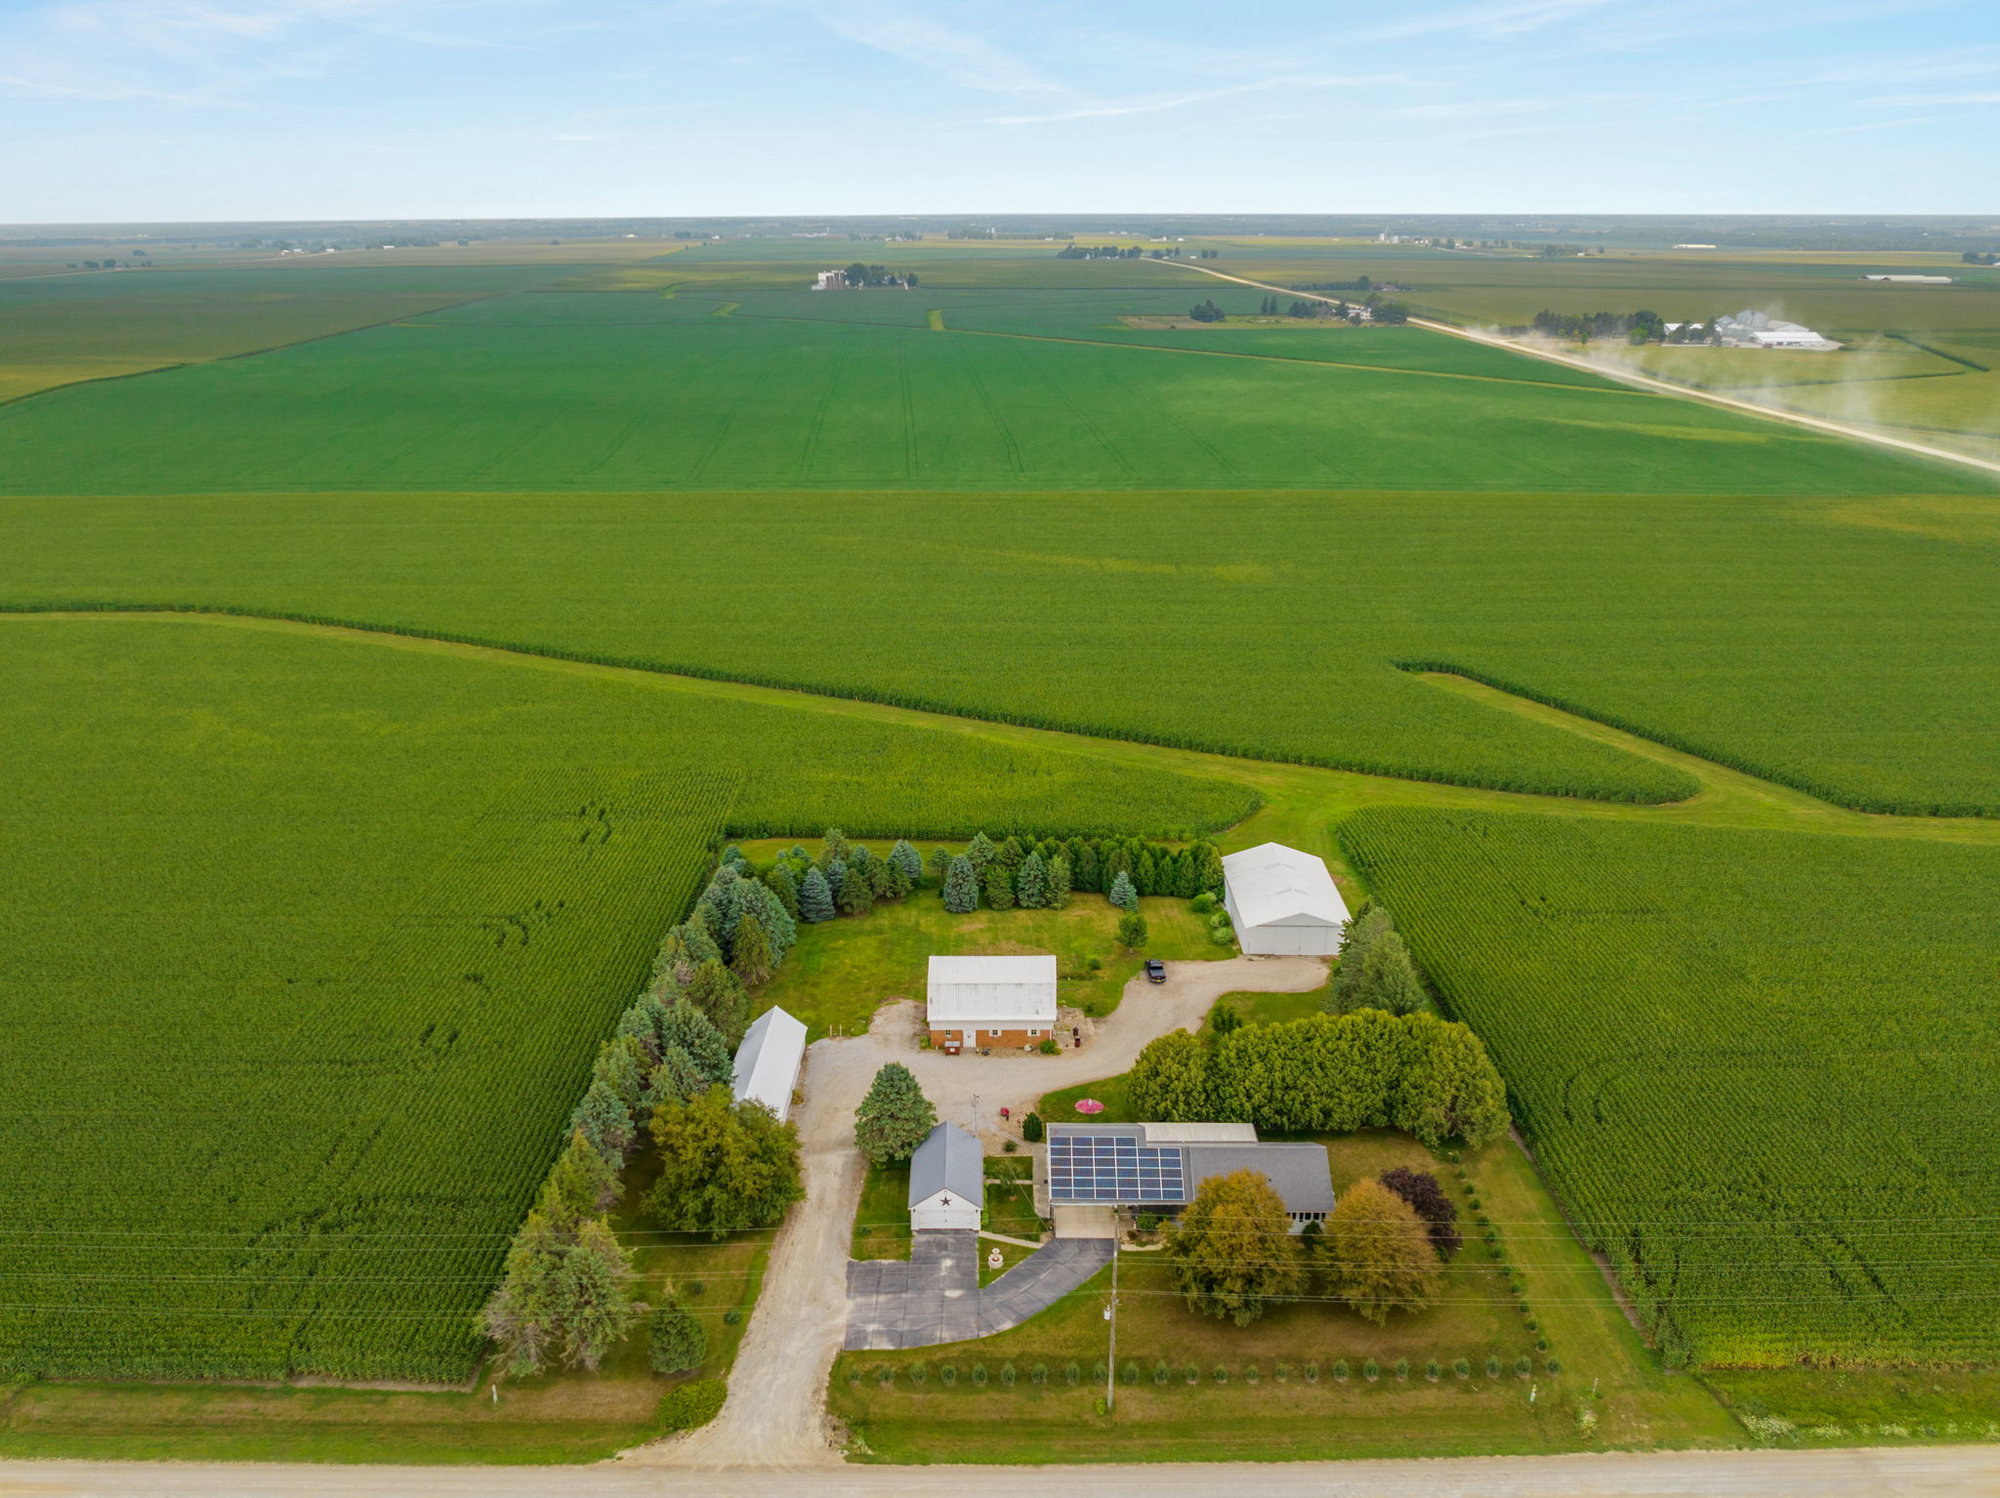 This Acreage in Jesup Iowa has everything you would want for small town living